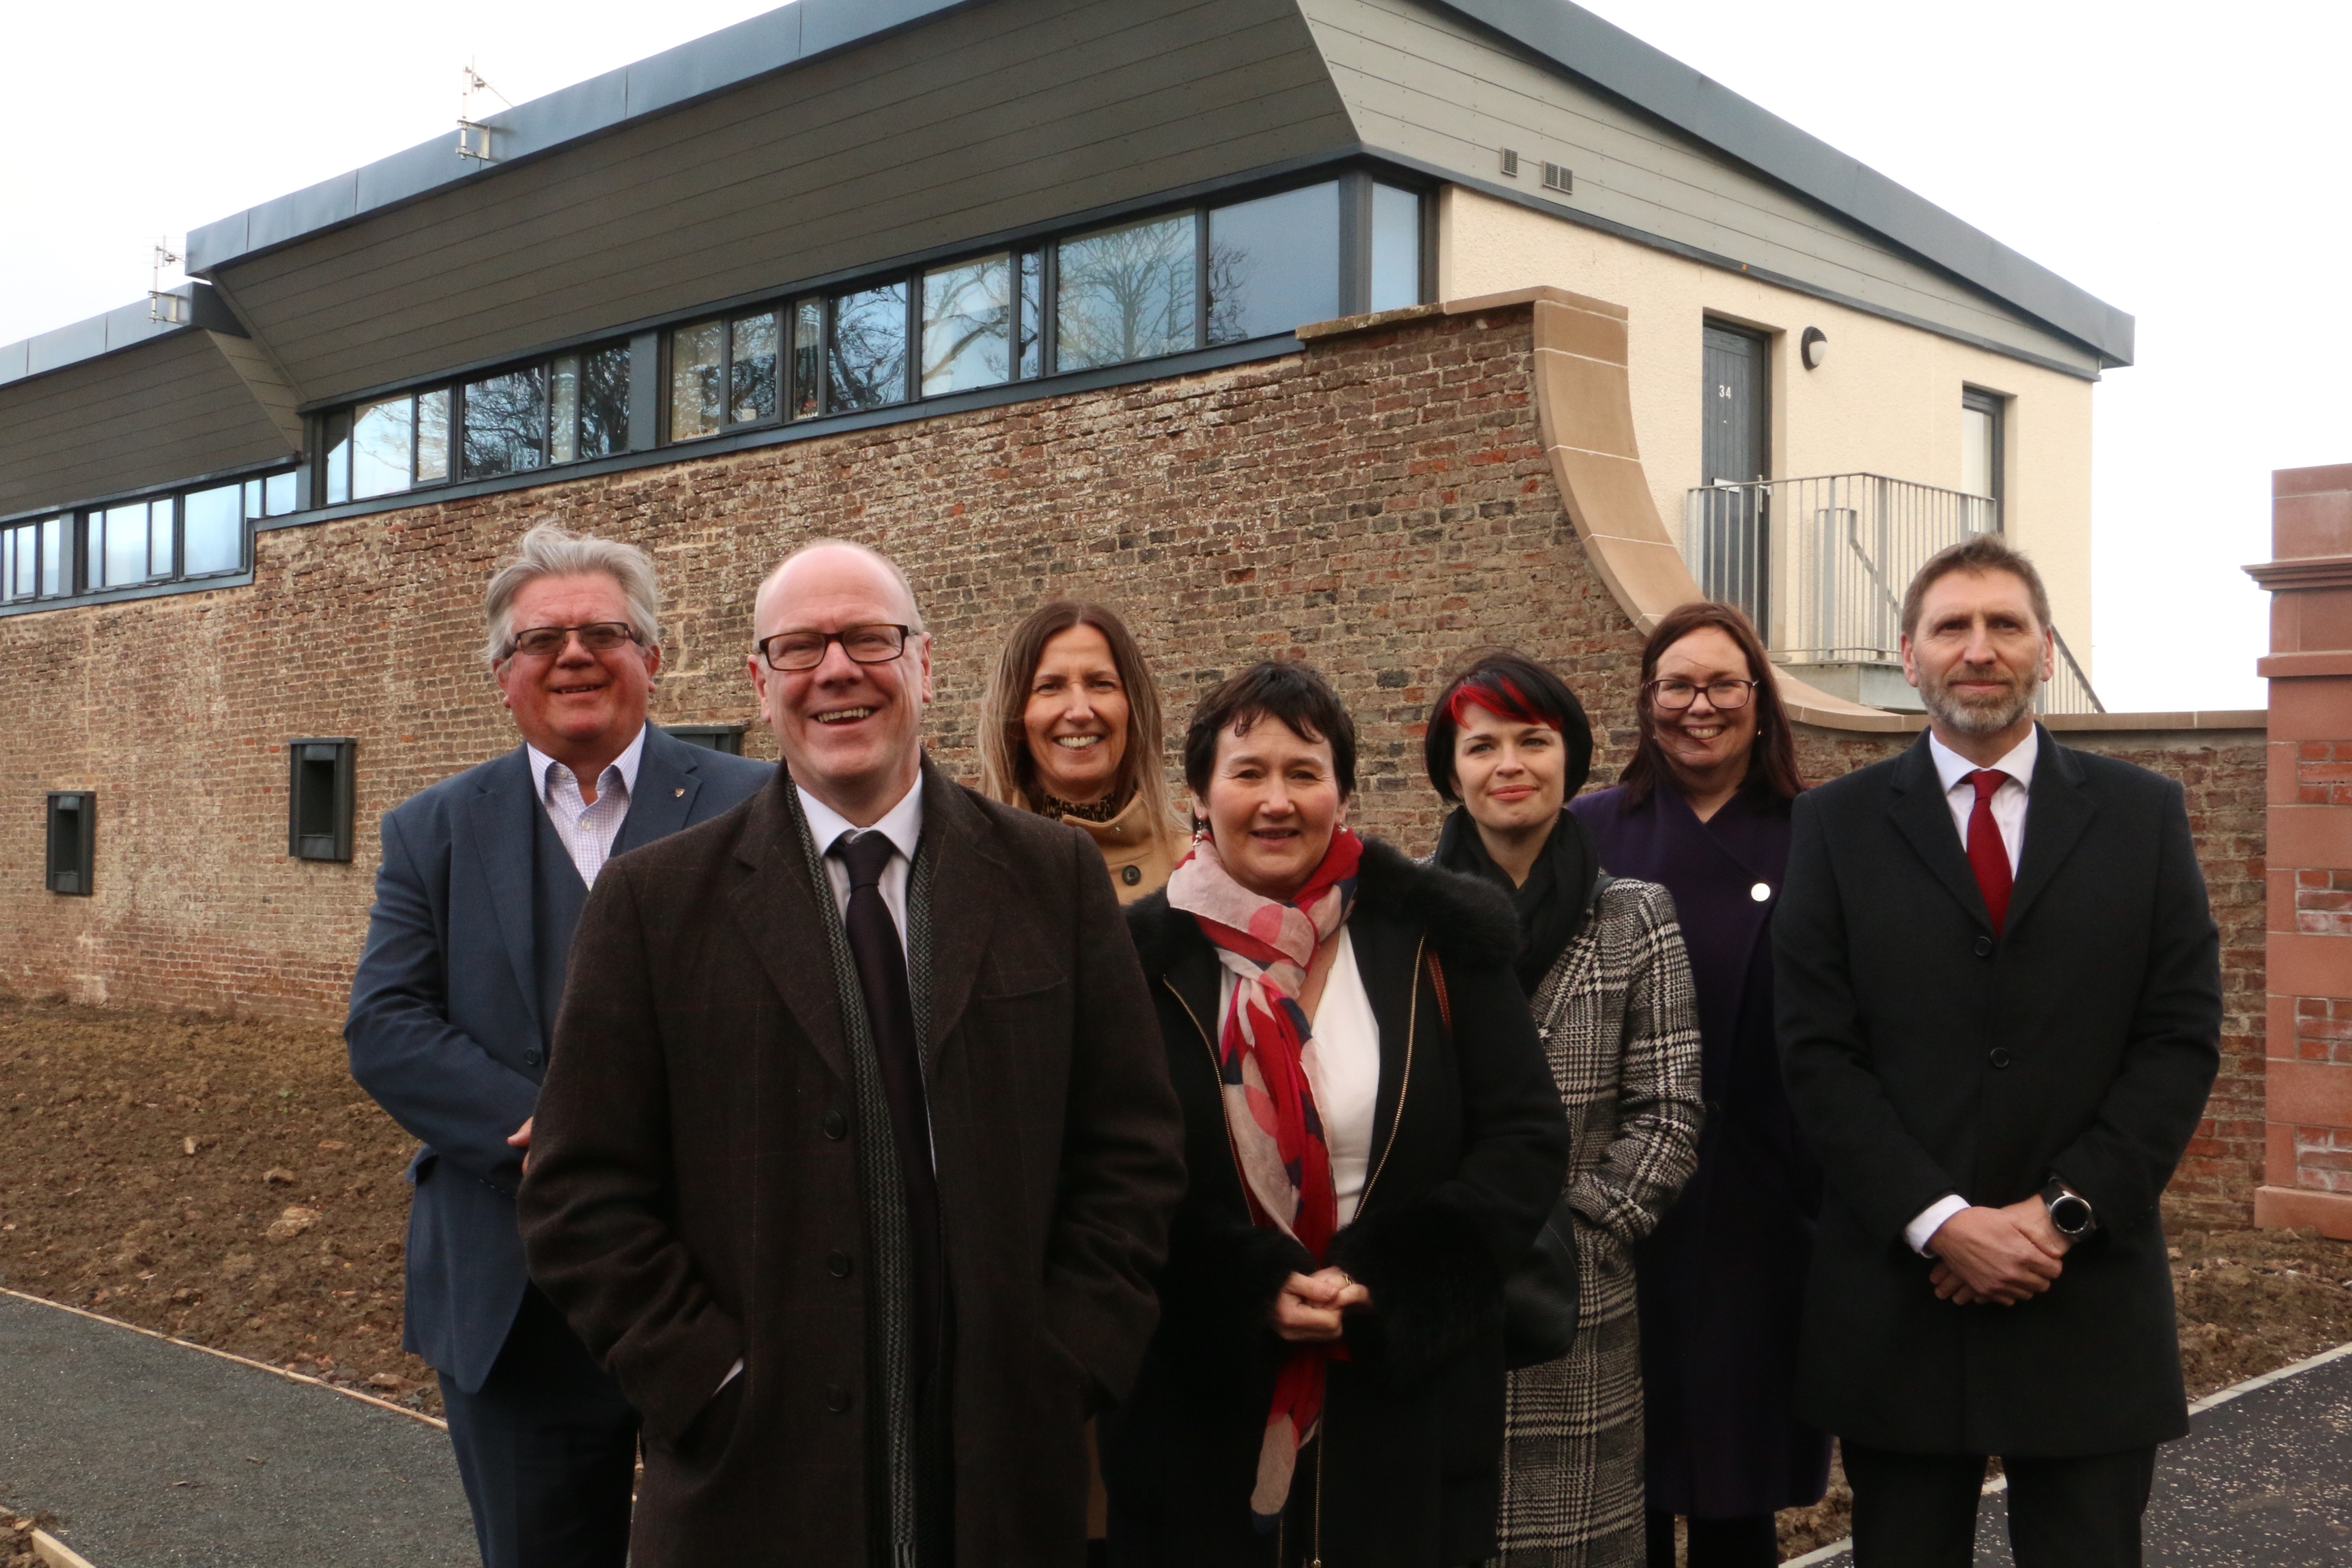 picture from left to right: Hillcrest Chairman Alan Russell, Scottish Housing Minister Kevin Stewart MSP, Hillcrest Deputy Chief Executive Fiona Morrison, Hillcrest Chief Executive Angela Linton, Edinburgh City Council Enabling & Partnerships Operations Manager Lisa Mallon, Hart Builders director of Business Development Gill Henry and Cruden Homes (East) Managing Director Steve Simpson.